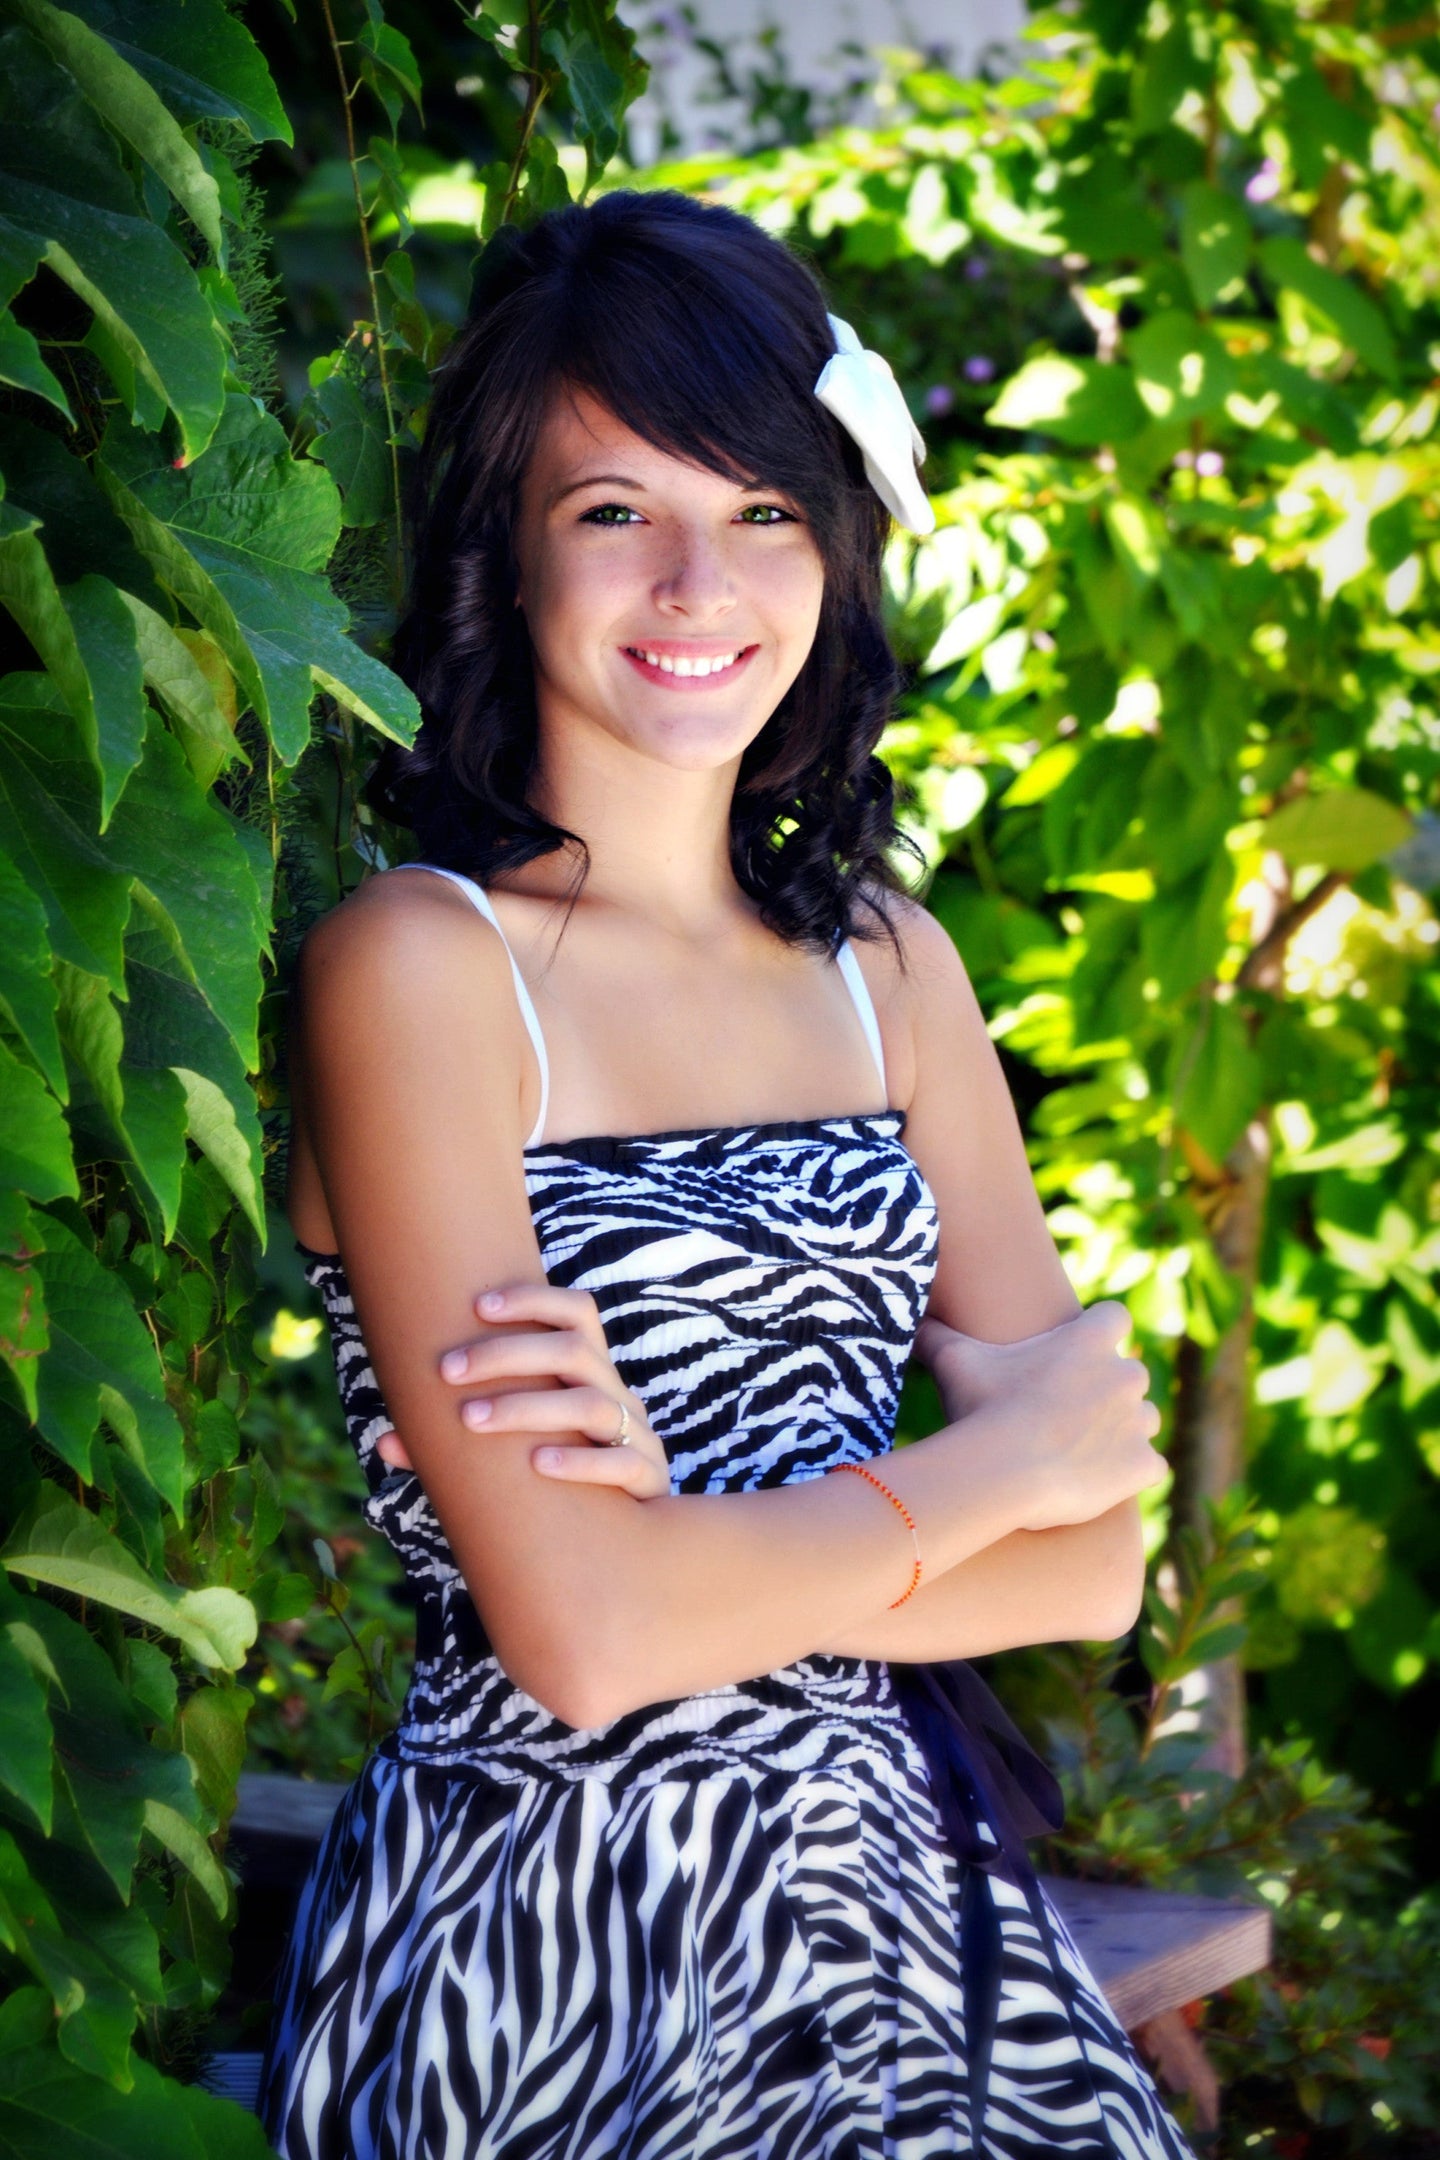 Smiling Girl with Zebra Party Dress Tracy McCrackin Photography - Tracy McCrackin Photography